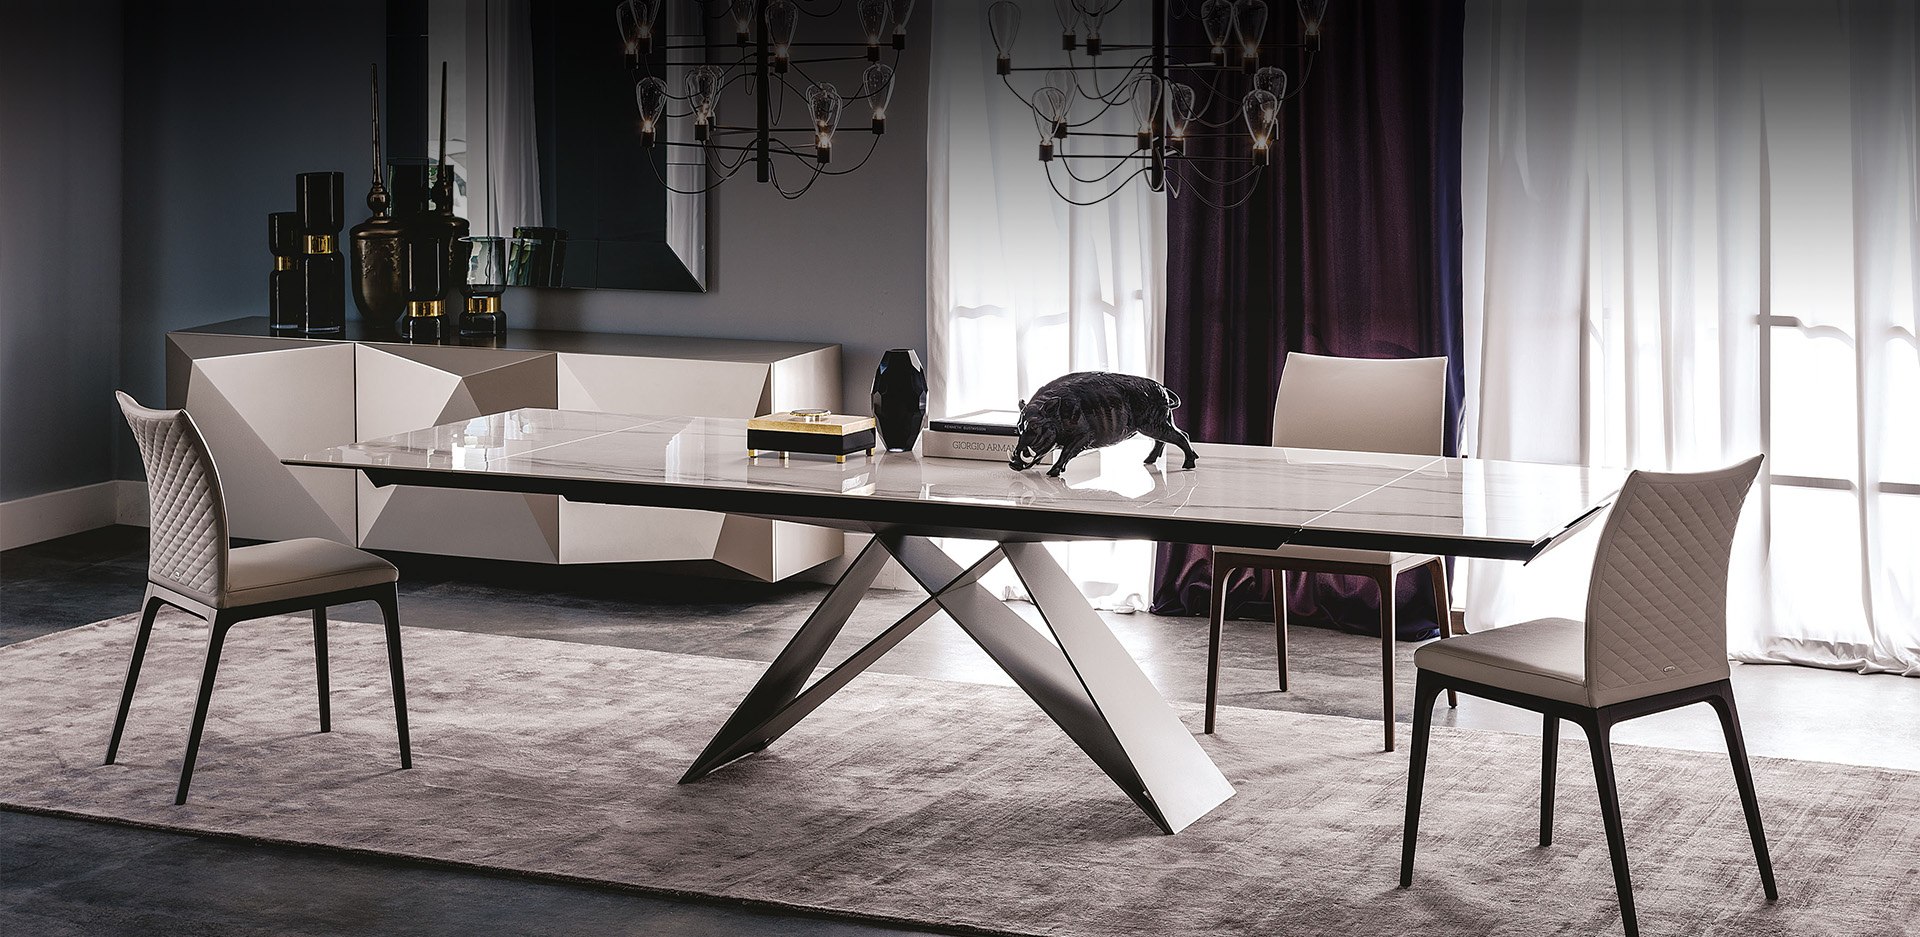 Cattelan Italia - Complementi d'arredo Made in Italy